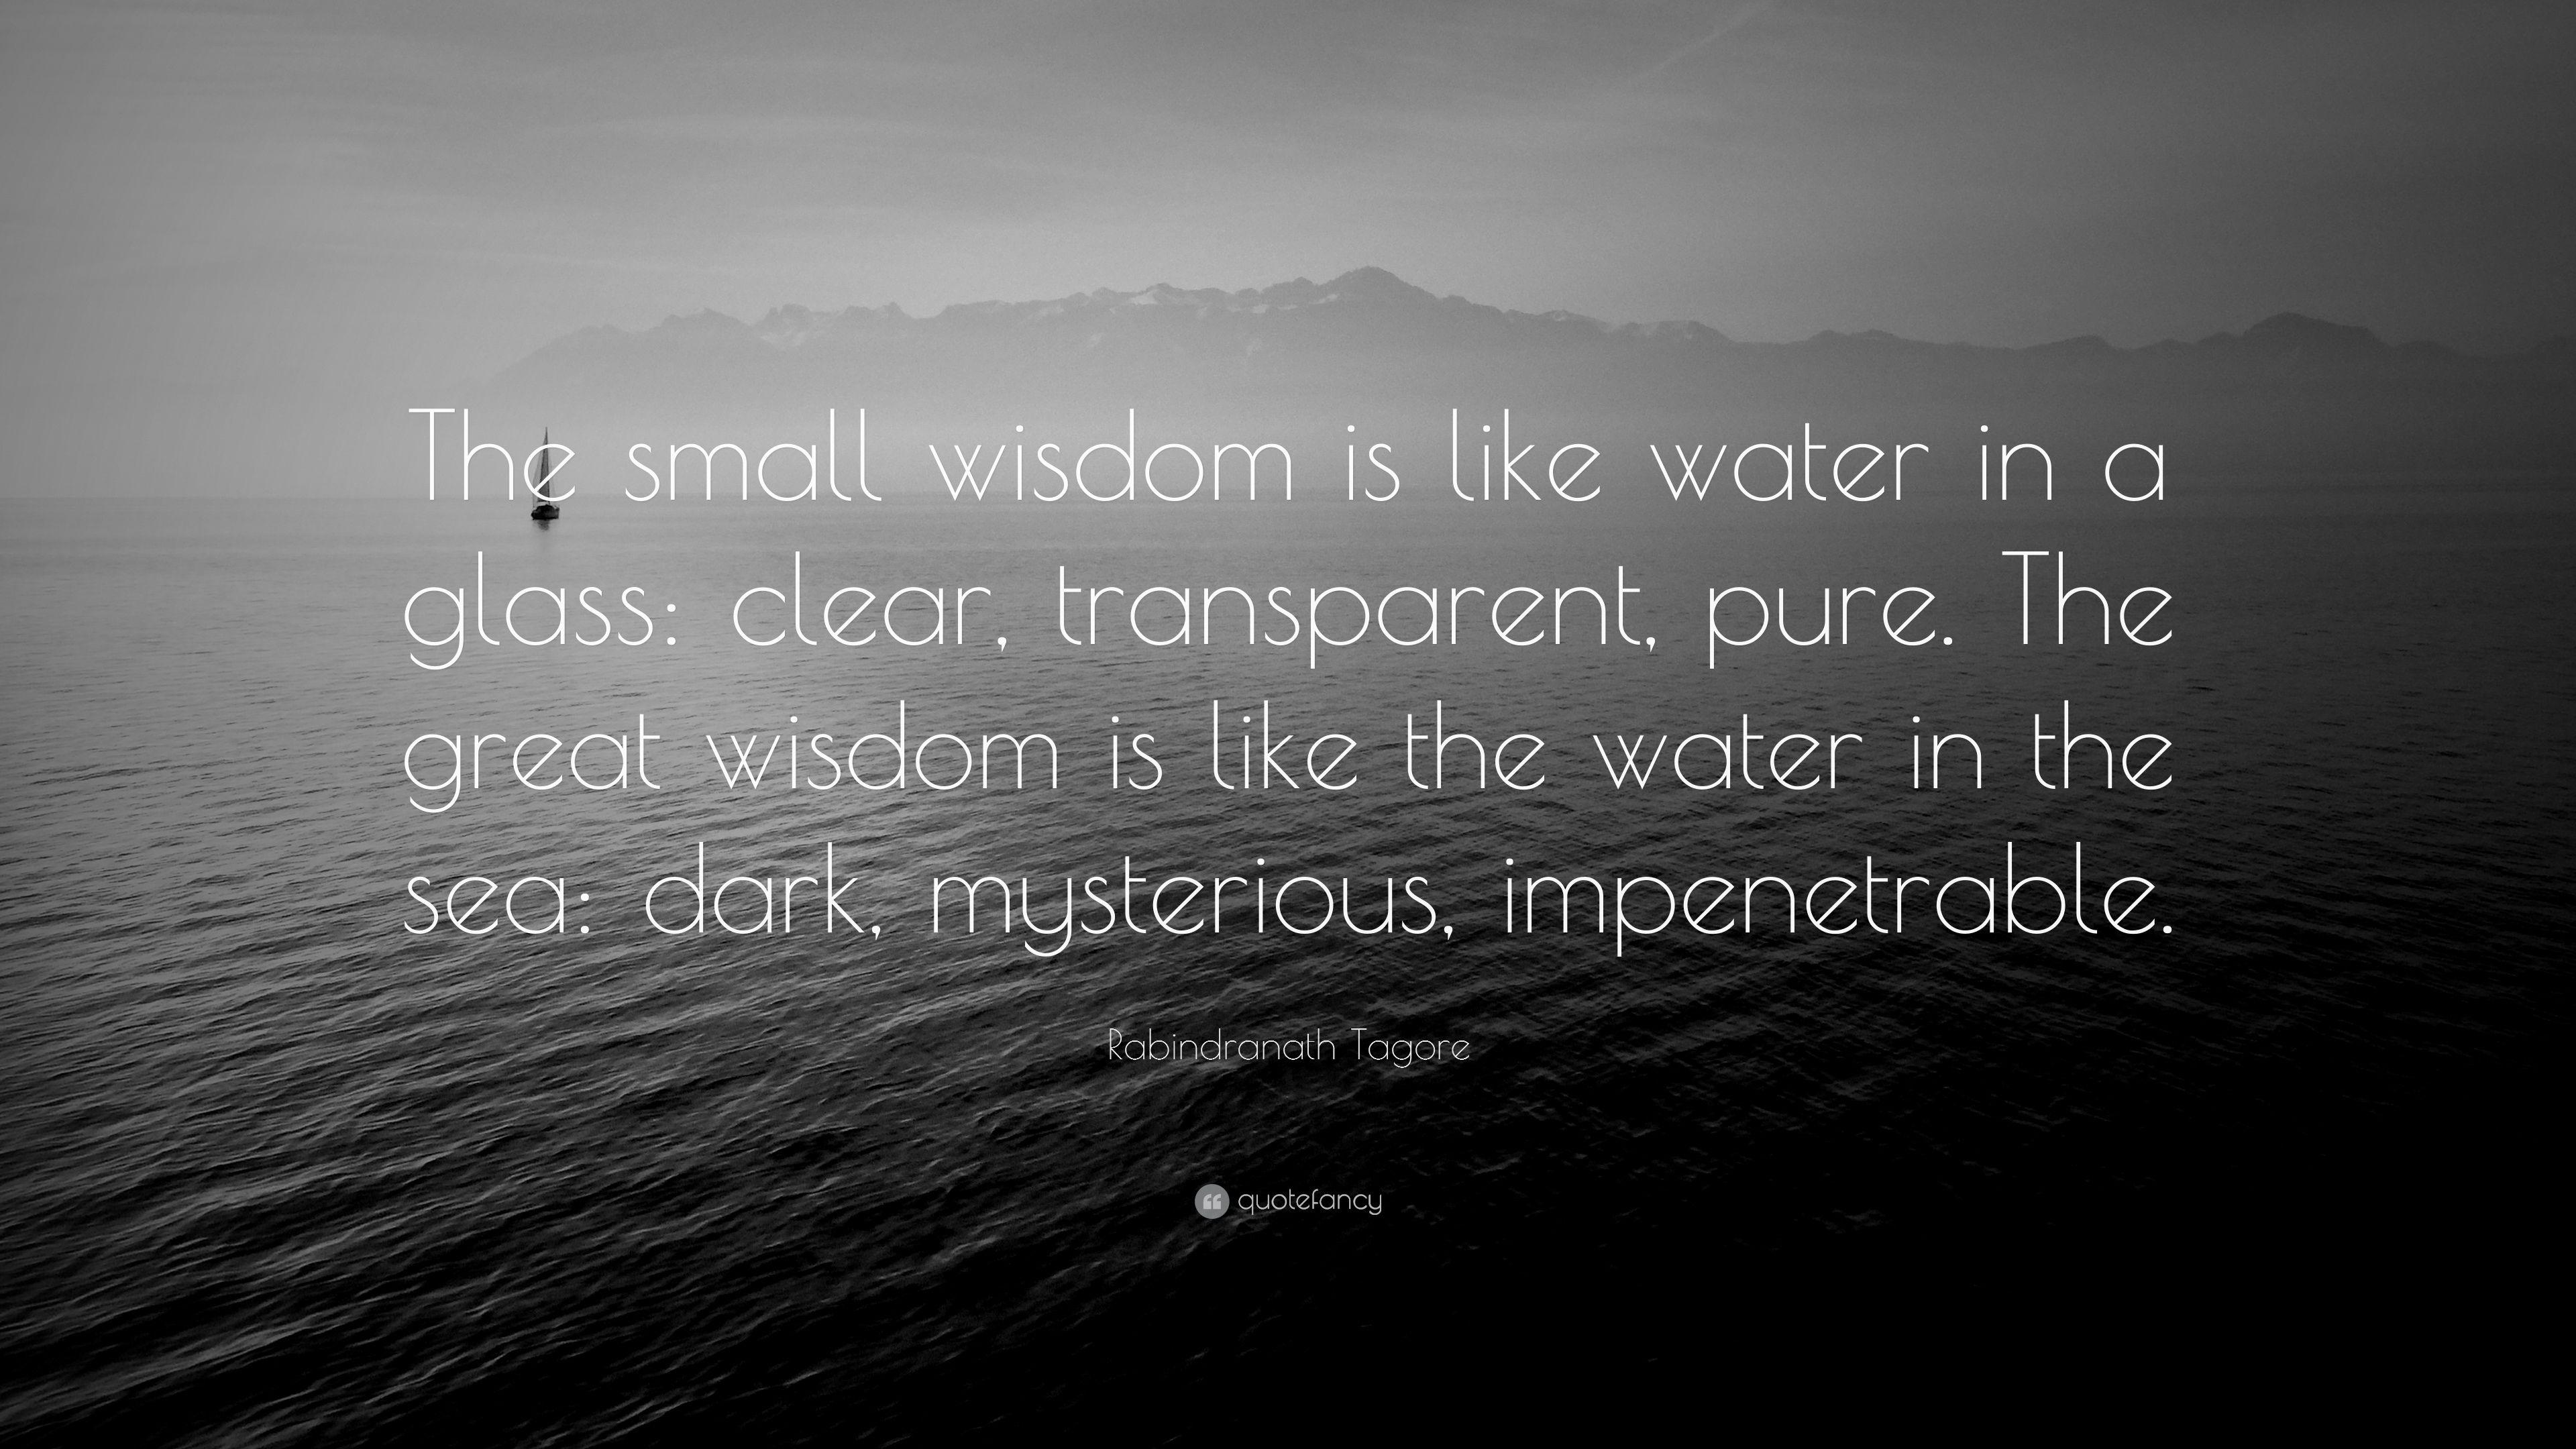 Rabindranath Tagore Quote: “The small wisdom is like water in a